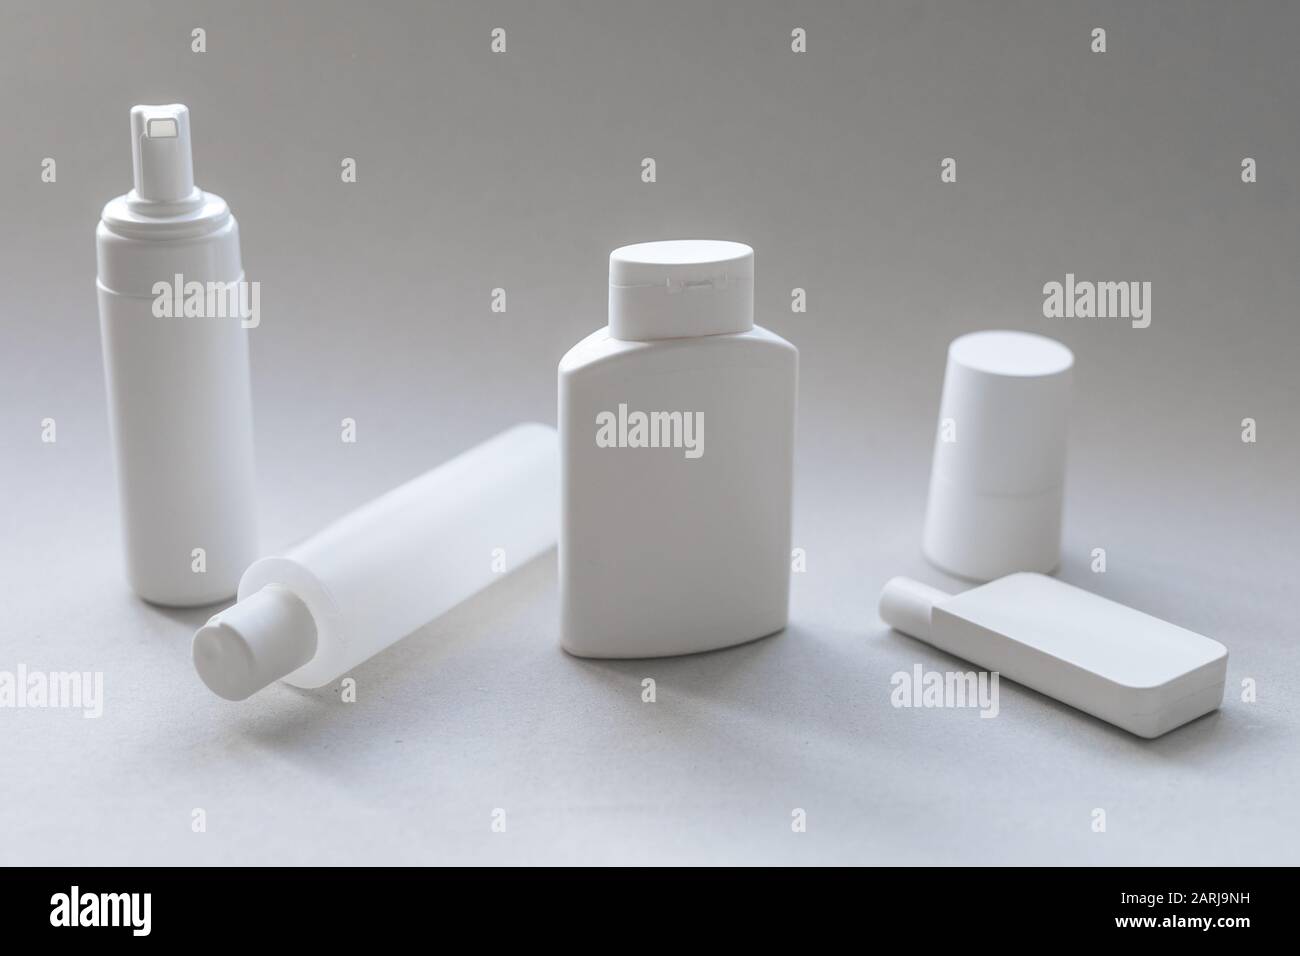 A compilation of white plastic cosmetic containers for body and face care A compilation of white plastic cosmetic containers for body and face care Stock Photo